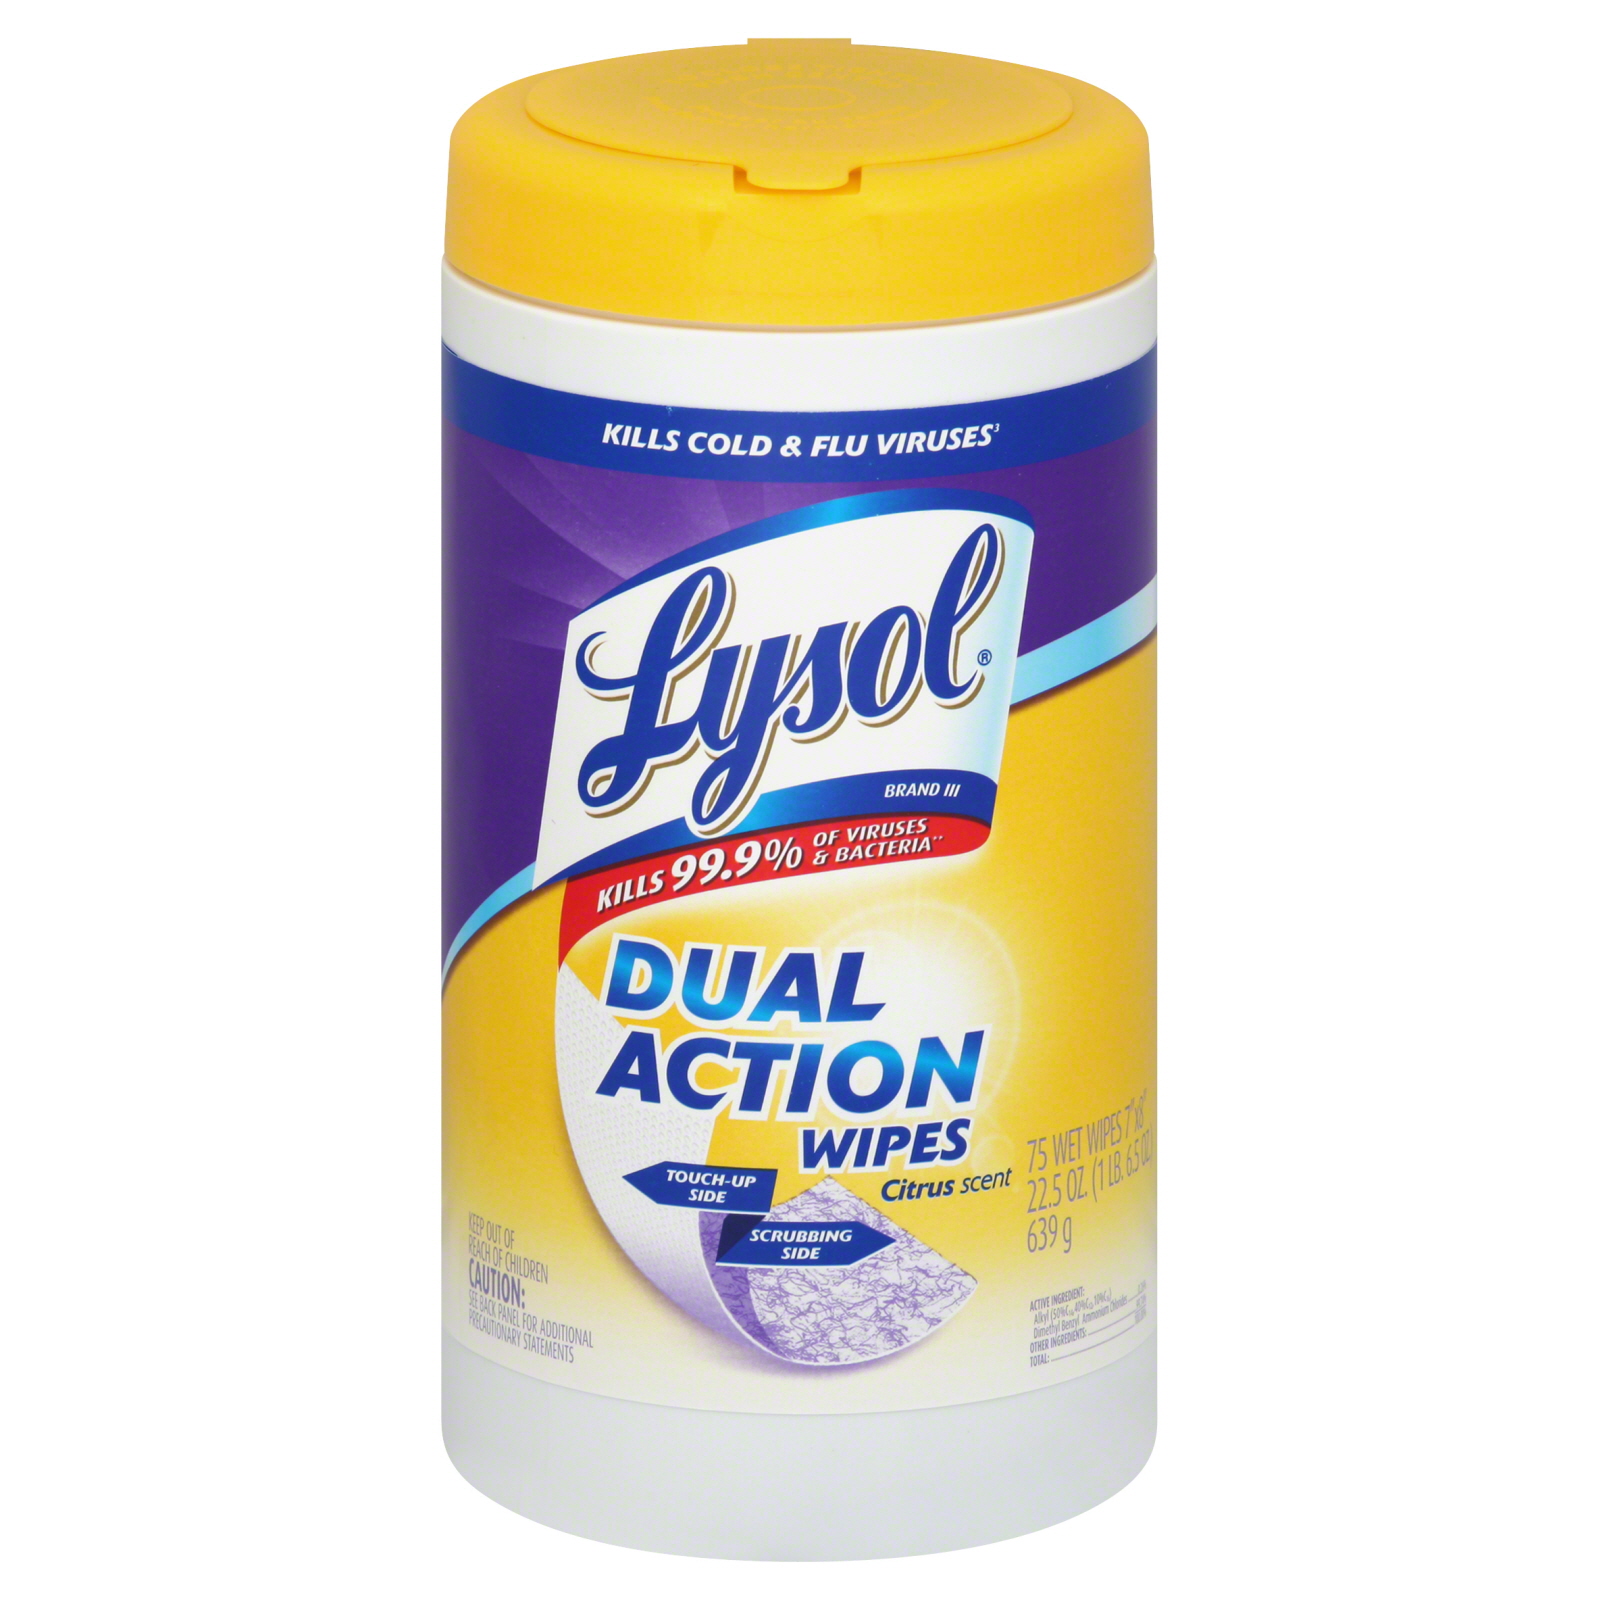 Lysol Complete Clean Disinfecting Wipes, Dual Action, Citrus Scent 75 wipes [25.6 oz (1 lb 9.6 oz) 727 g]